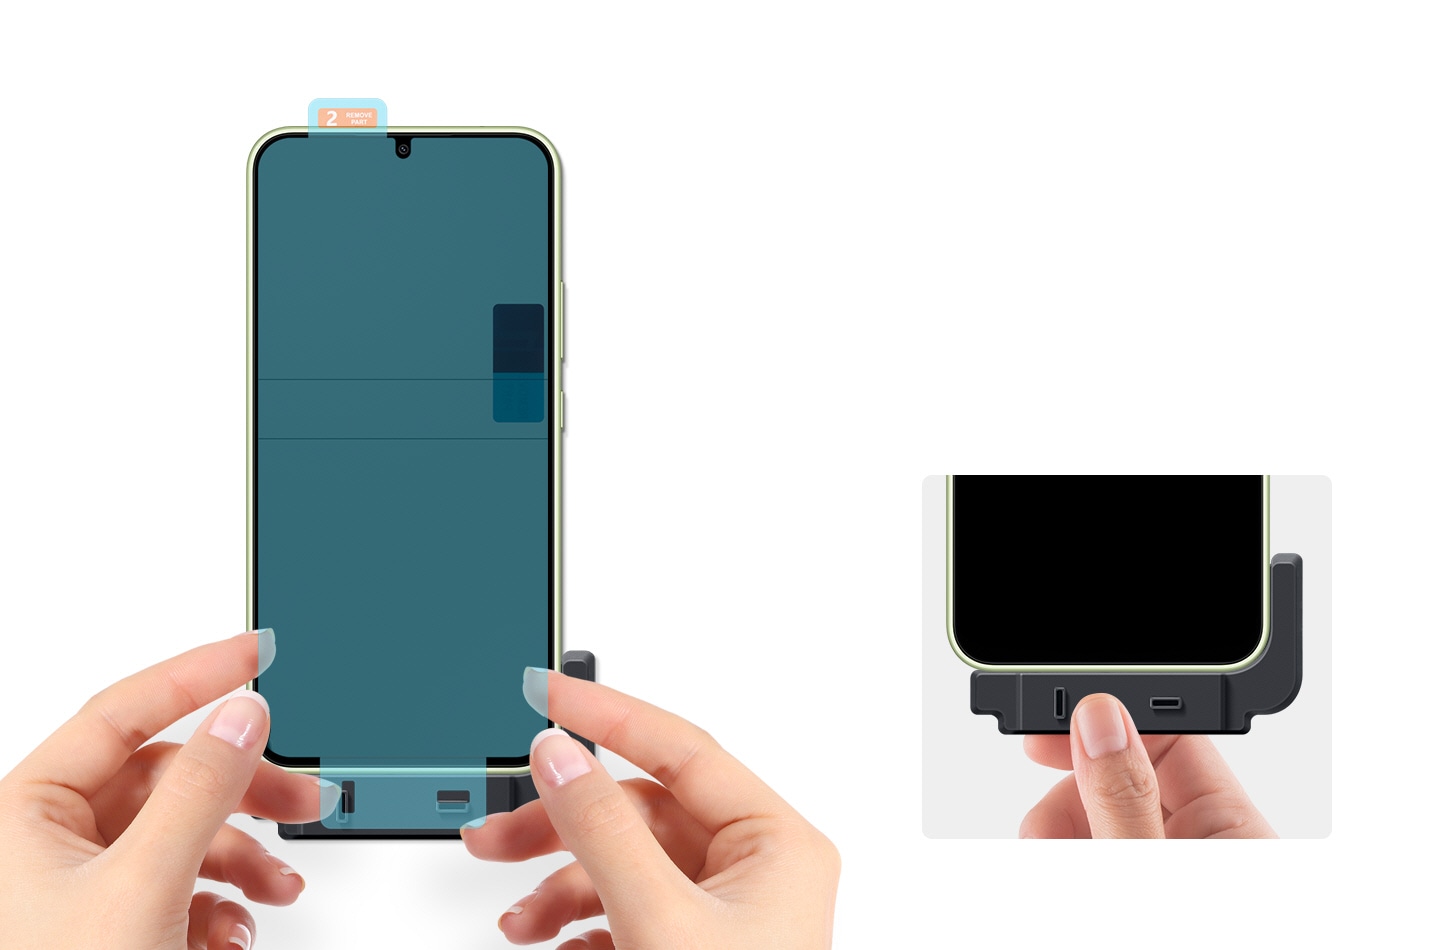 On the left, two hands are using the provided frame to cleanly install the Screen Protector. On the right, a hand holds up part of the frame after finishing an easy installation.